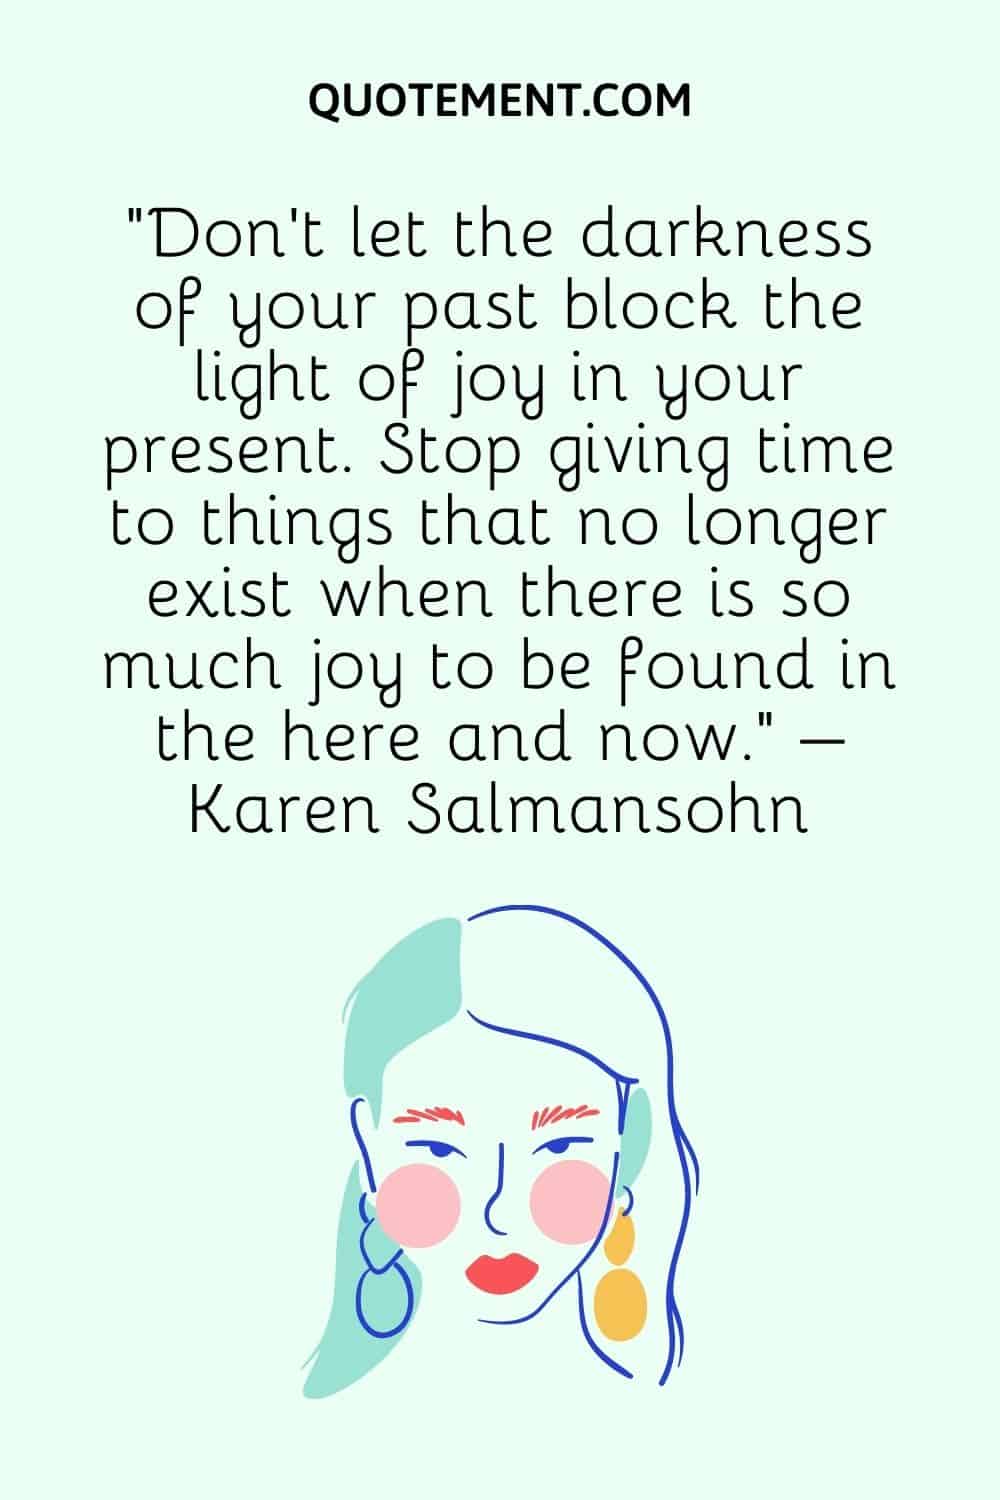 “Don’t let the darkness of your past block the light of joy in your present. Stop giving time to things that no longer exist when there is so much joy to be found in the here and now.” – Karen Salmansohn